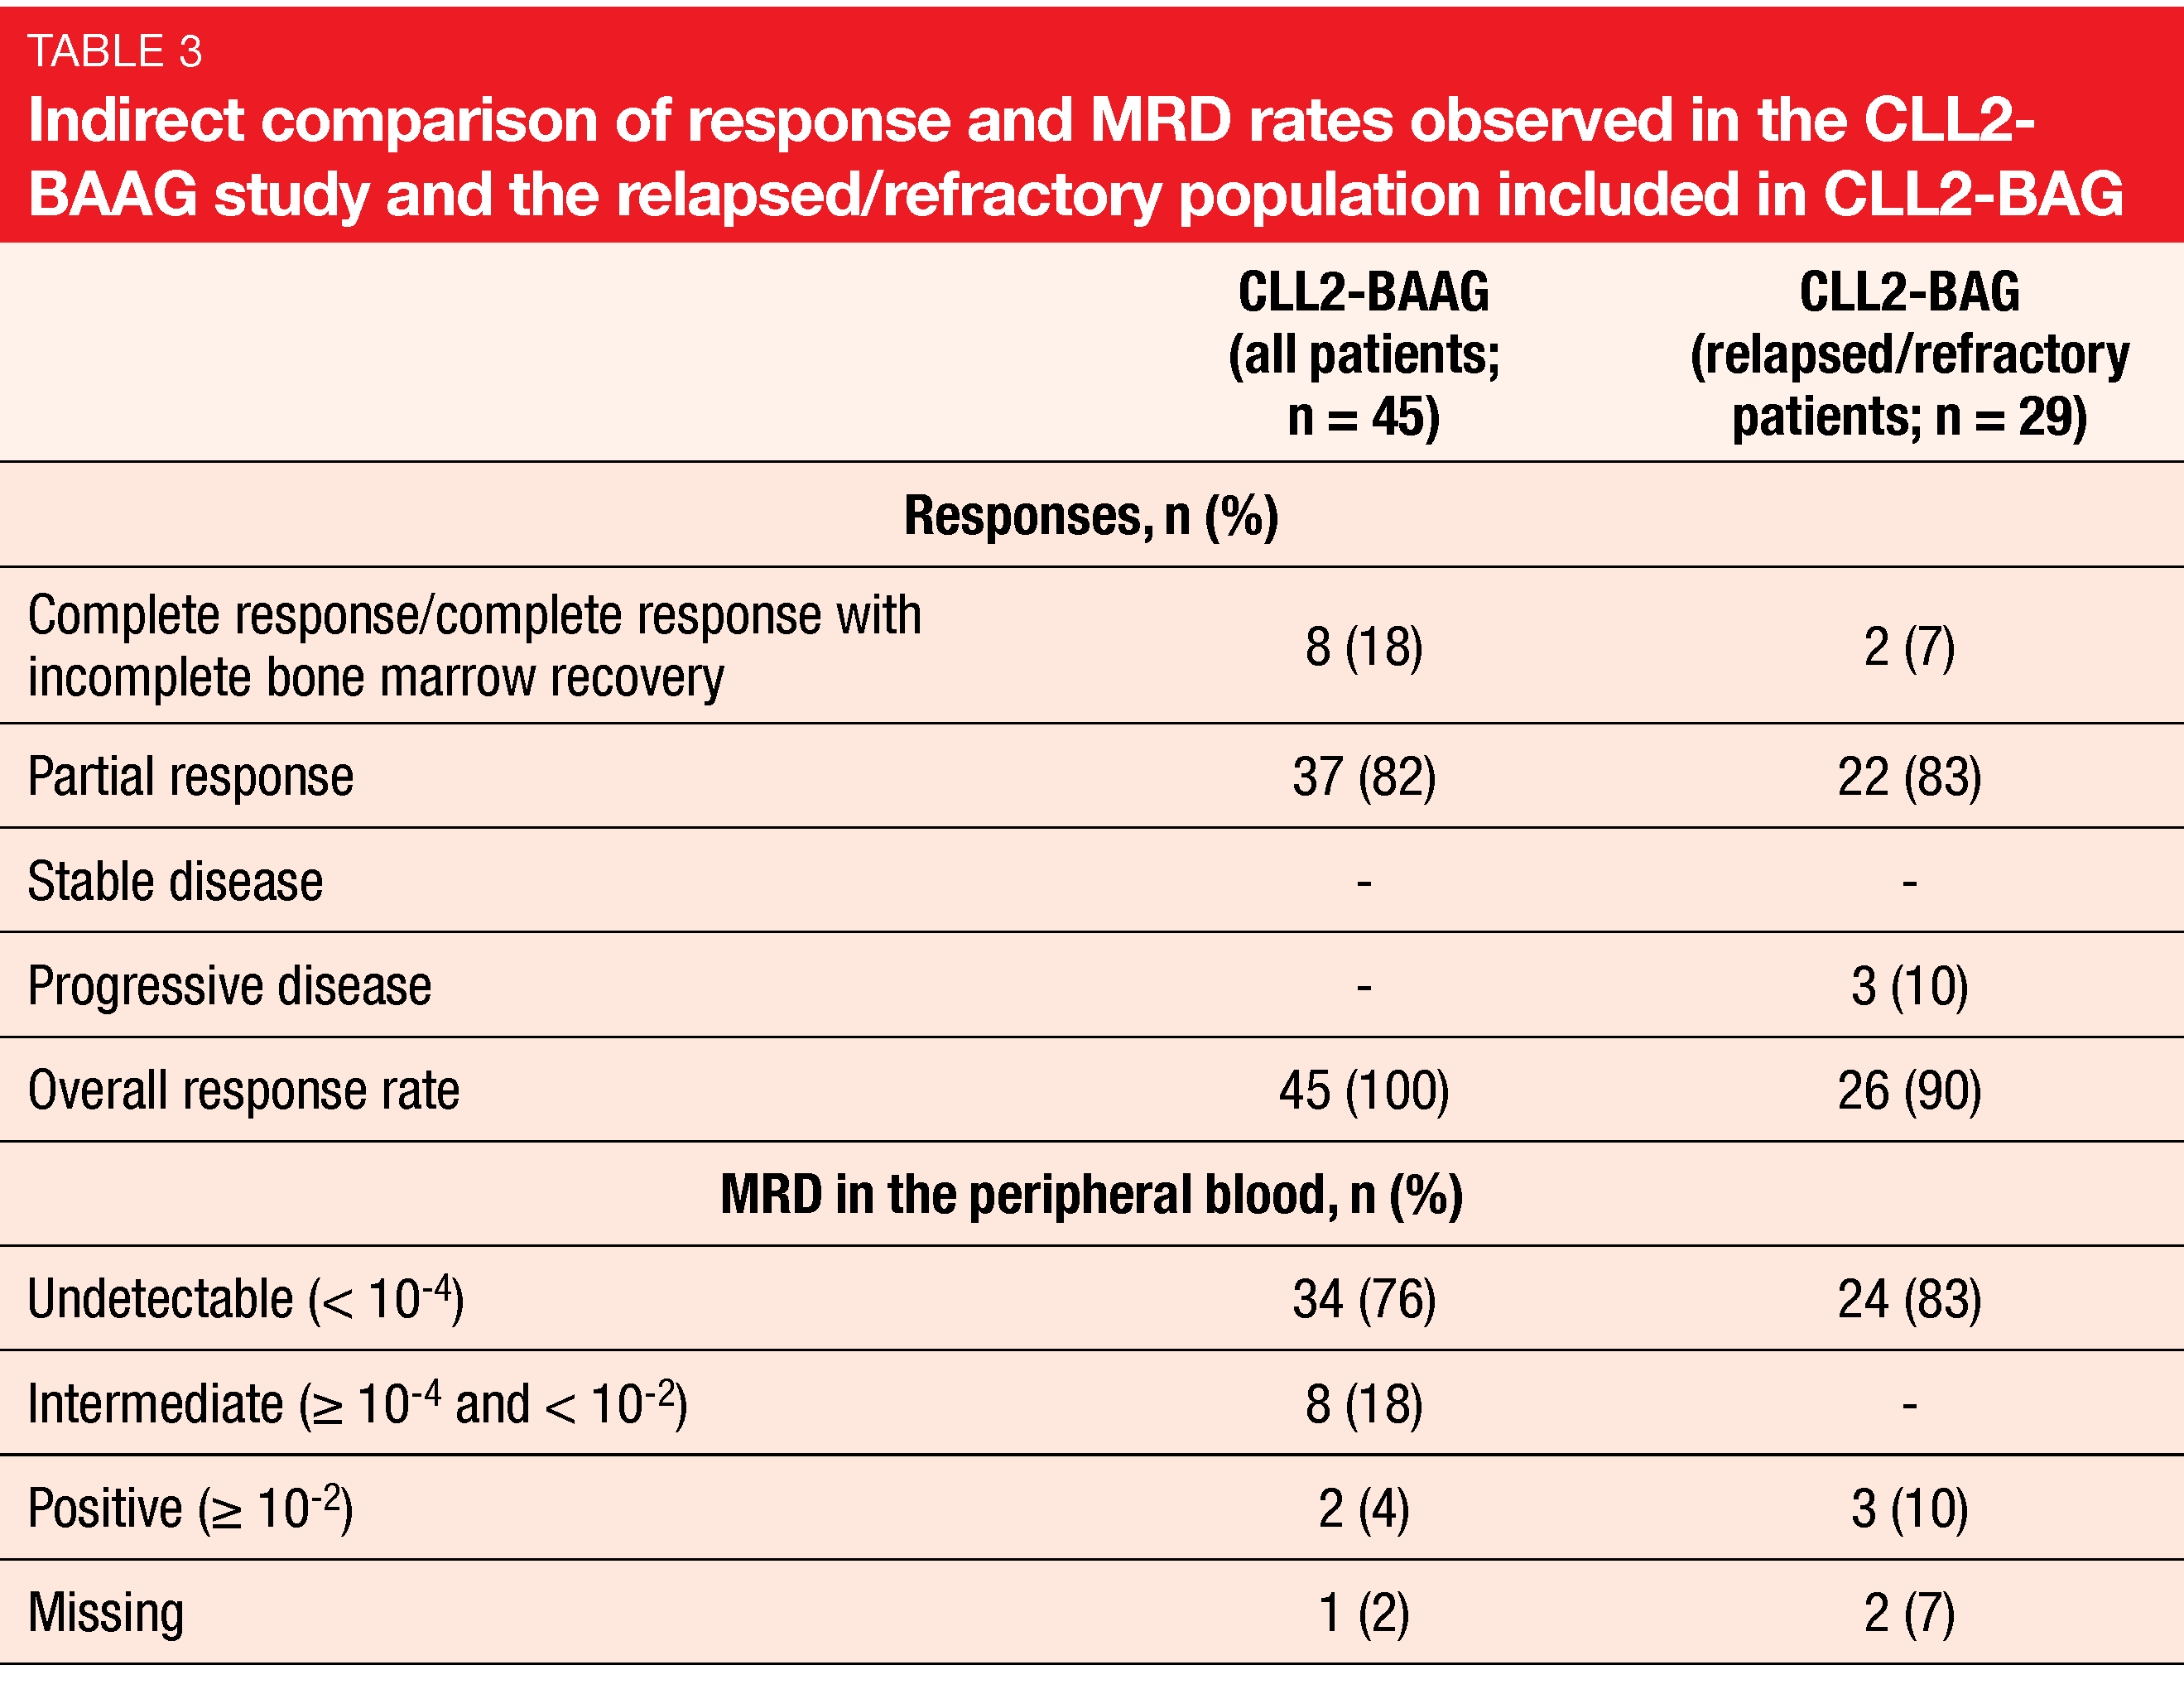 Table 3 Indirect comparison of response and MRD rates observed in the CLL2-BAAG study and the relapsed/refractory population included in CLL2-BAG